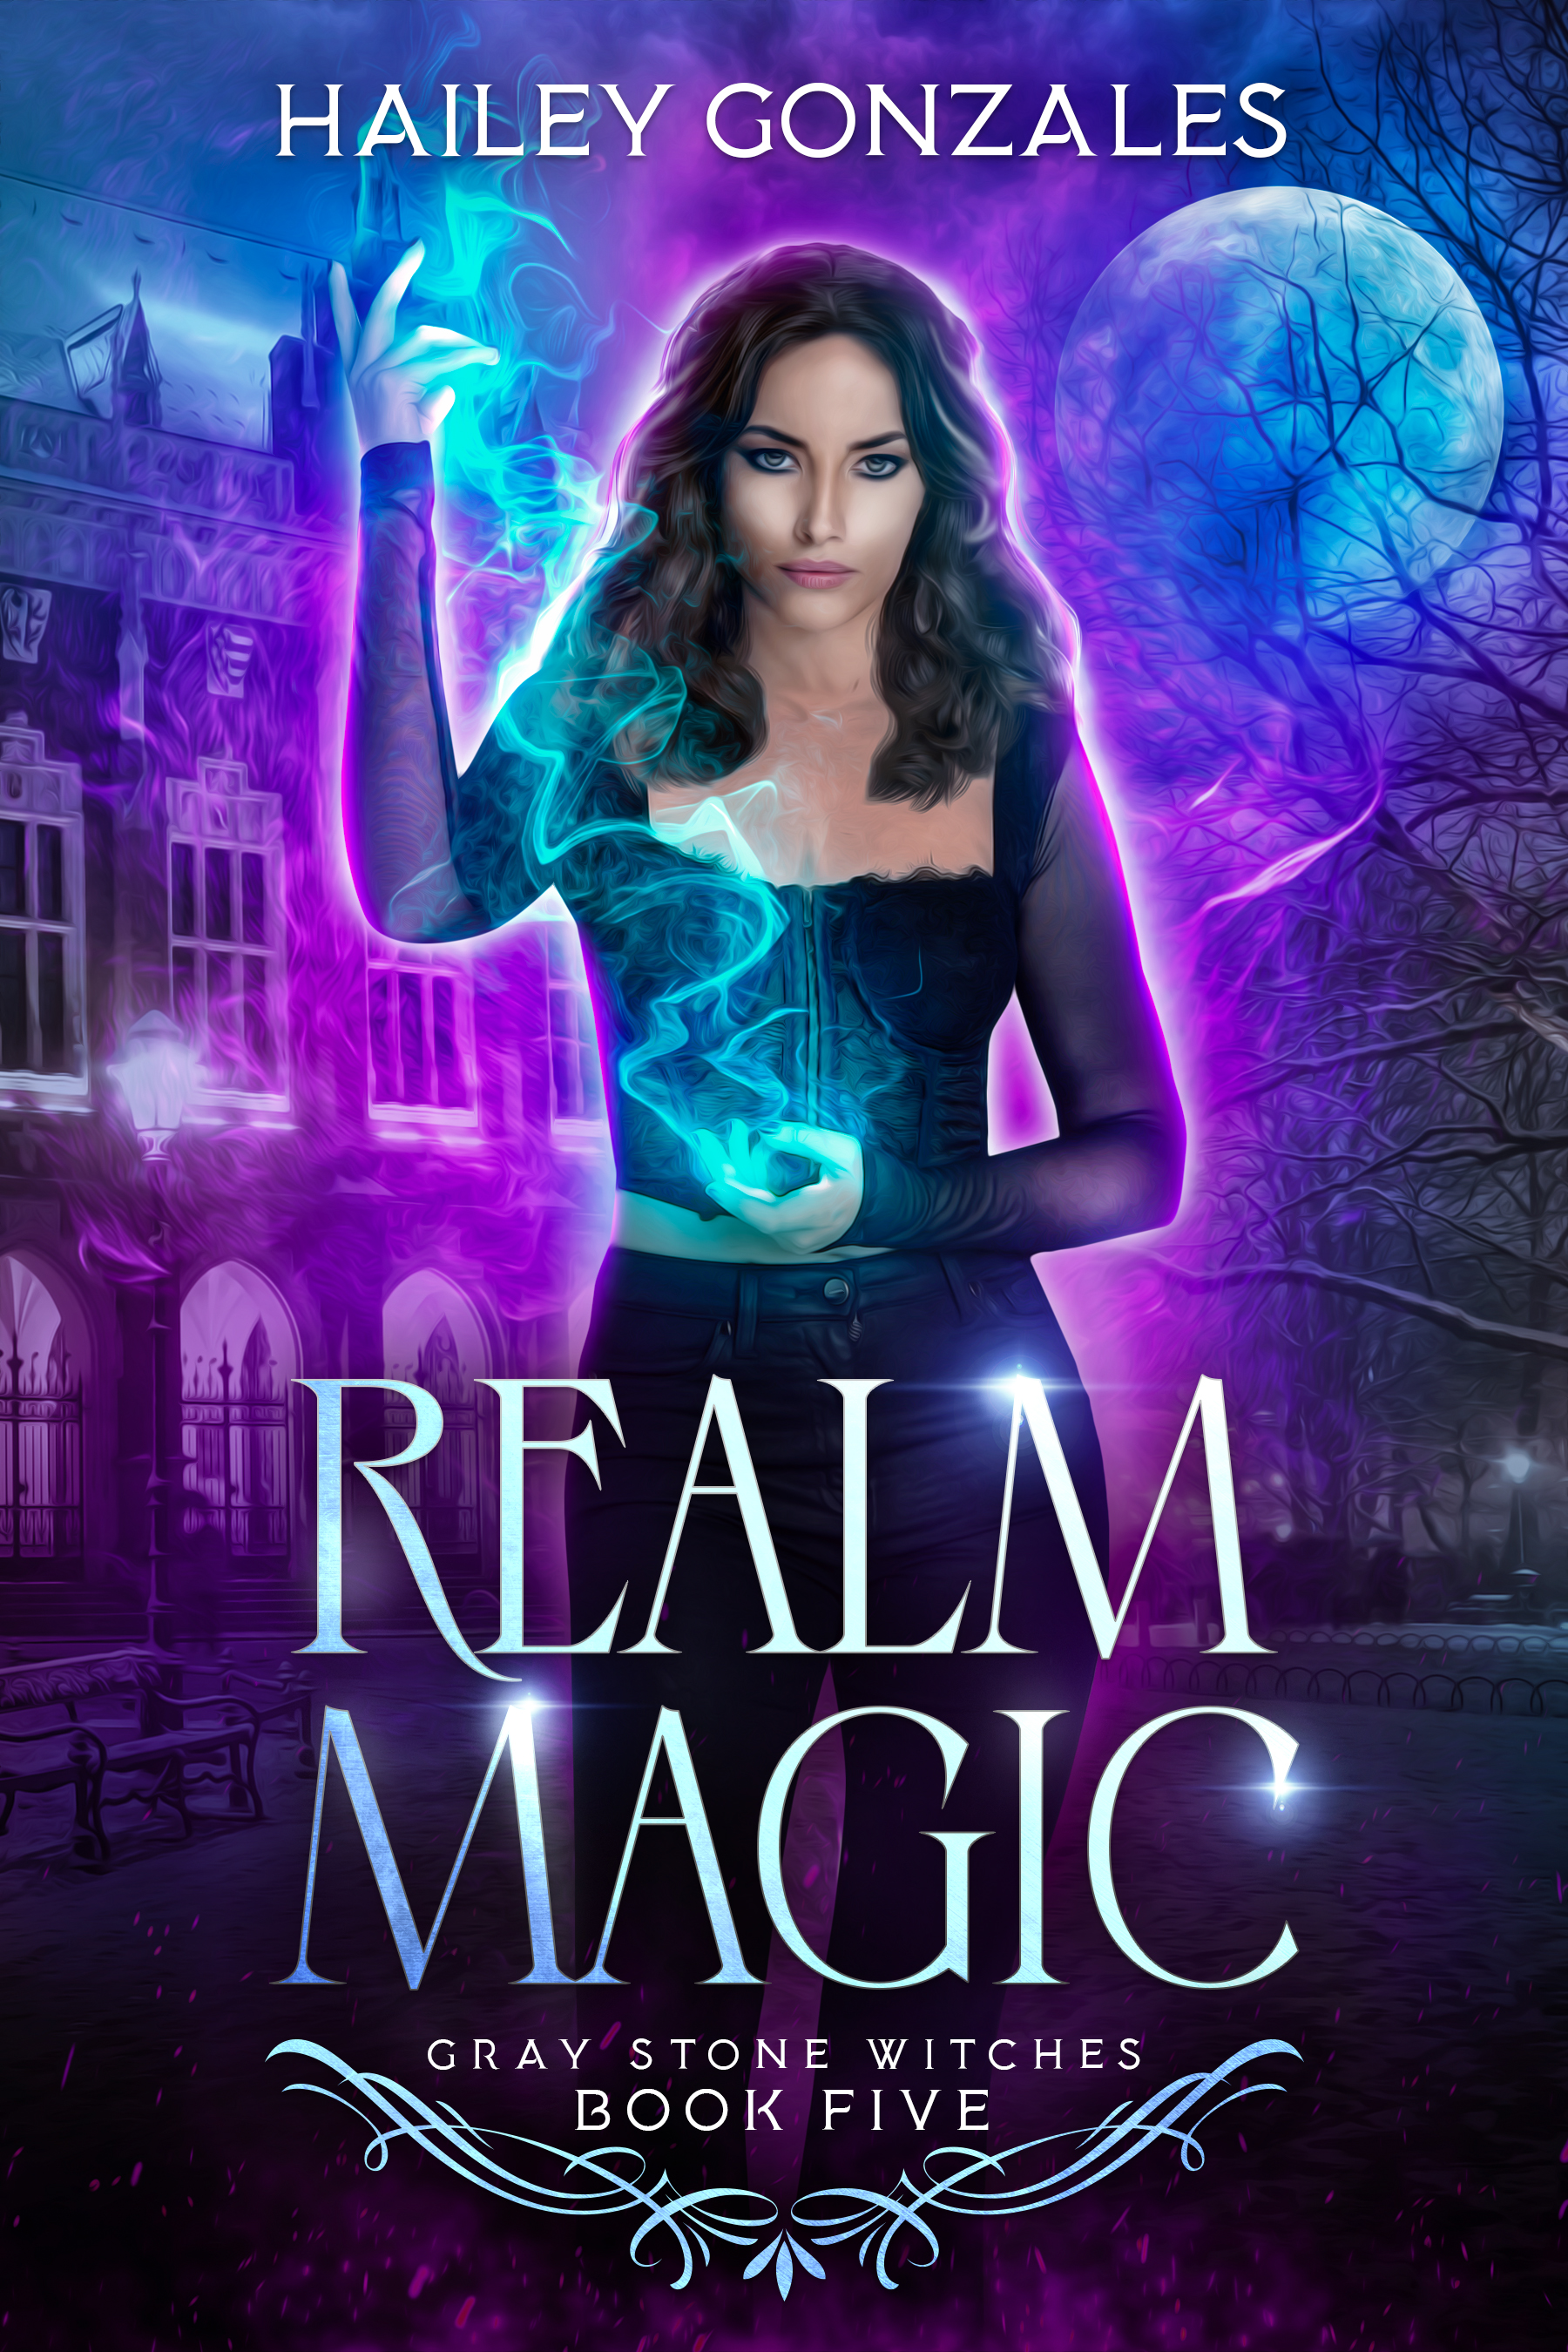 realm-magic-gray-stone-witches-book-five